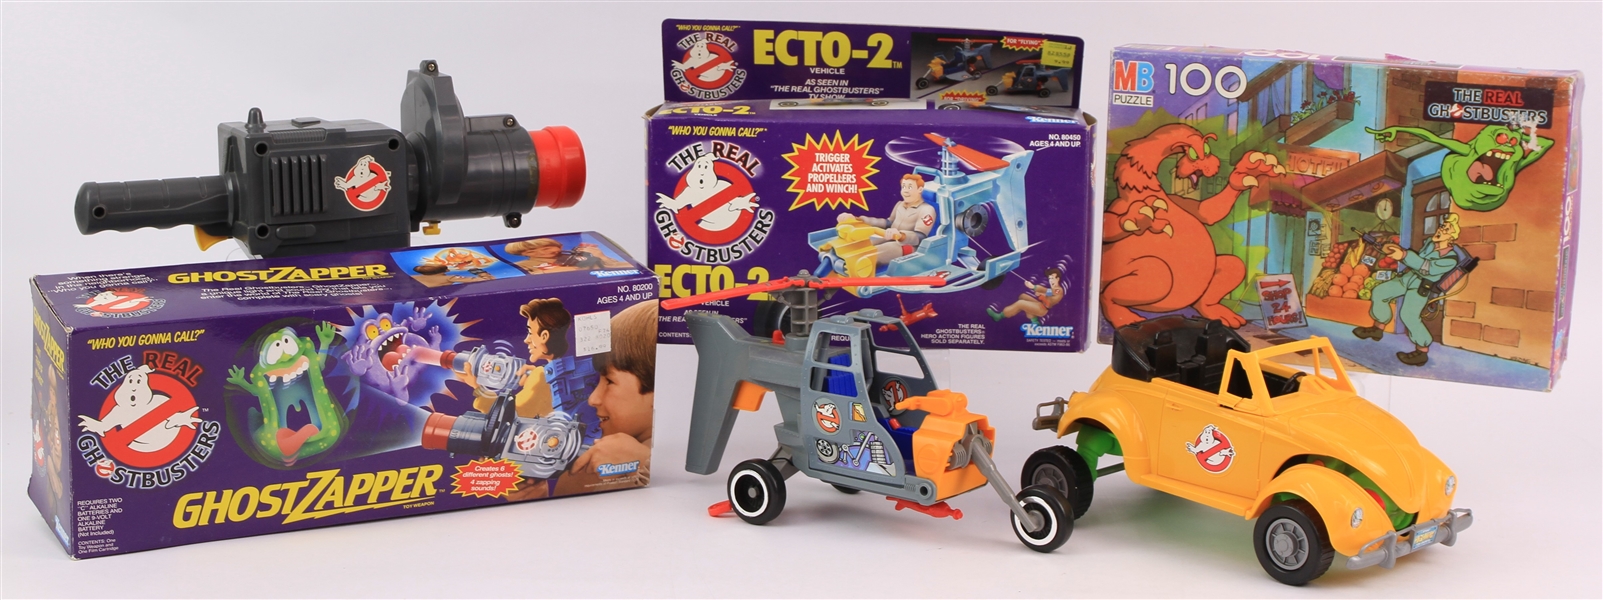 1986 Ghostbusters Toy Collection - Lot of 5 w/ Fire House Headquarters in Original Box, MIB Ghost Zapper, MIB Ecto-2 & More